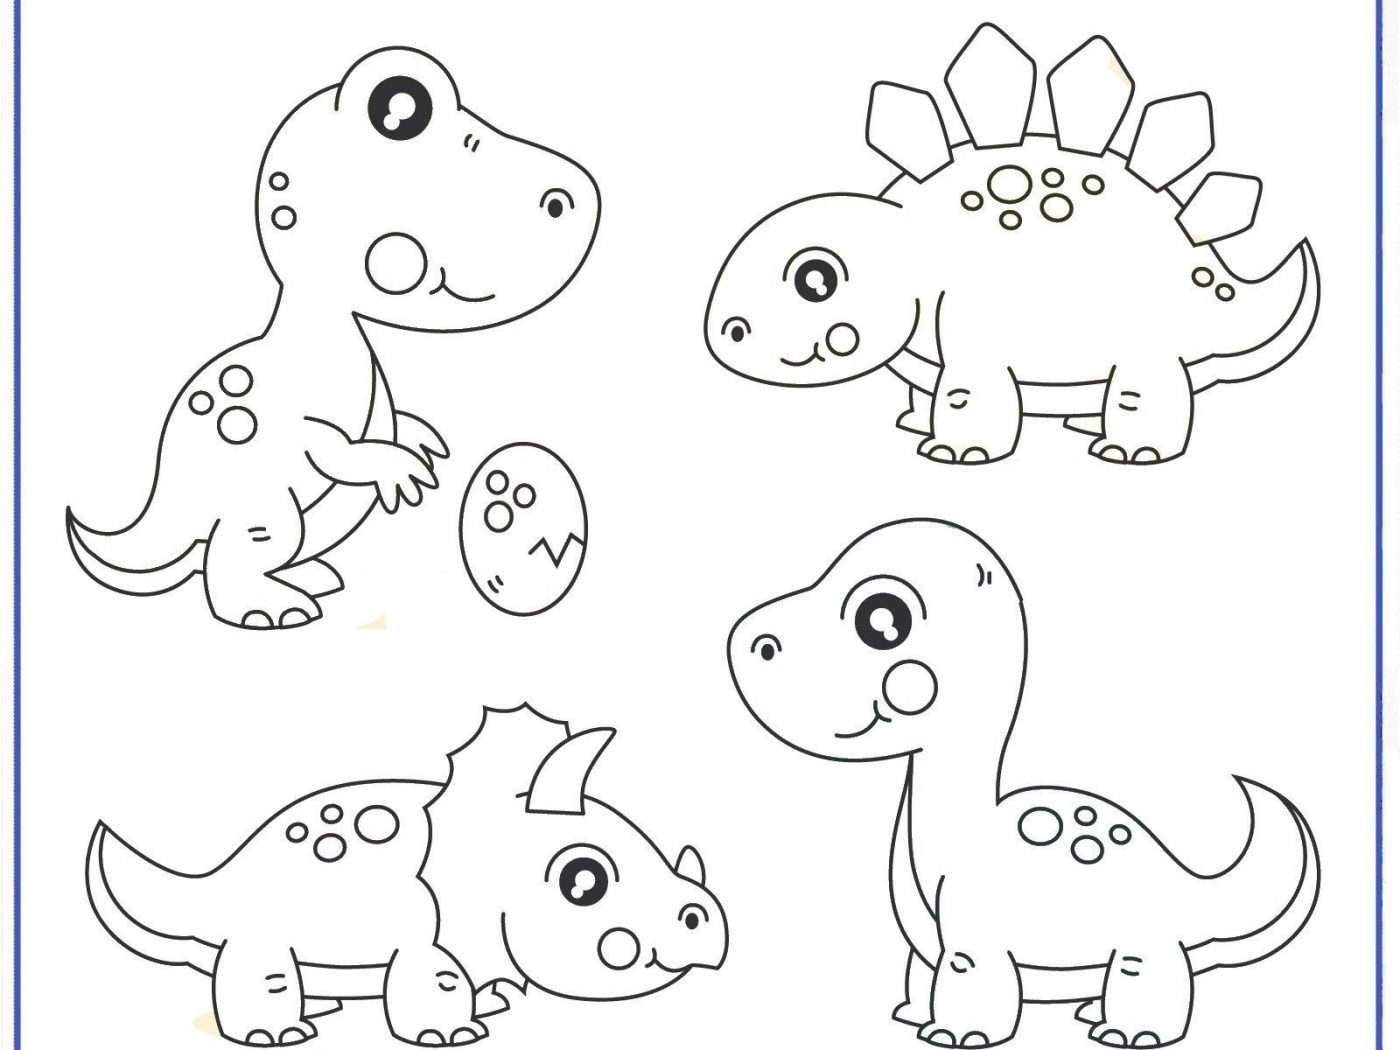 Coloring pages printable dinosaur coloring pages dinosaurg pictures preschool for kids to color free